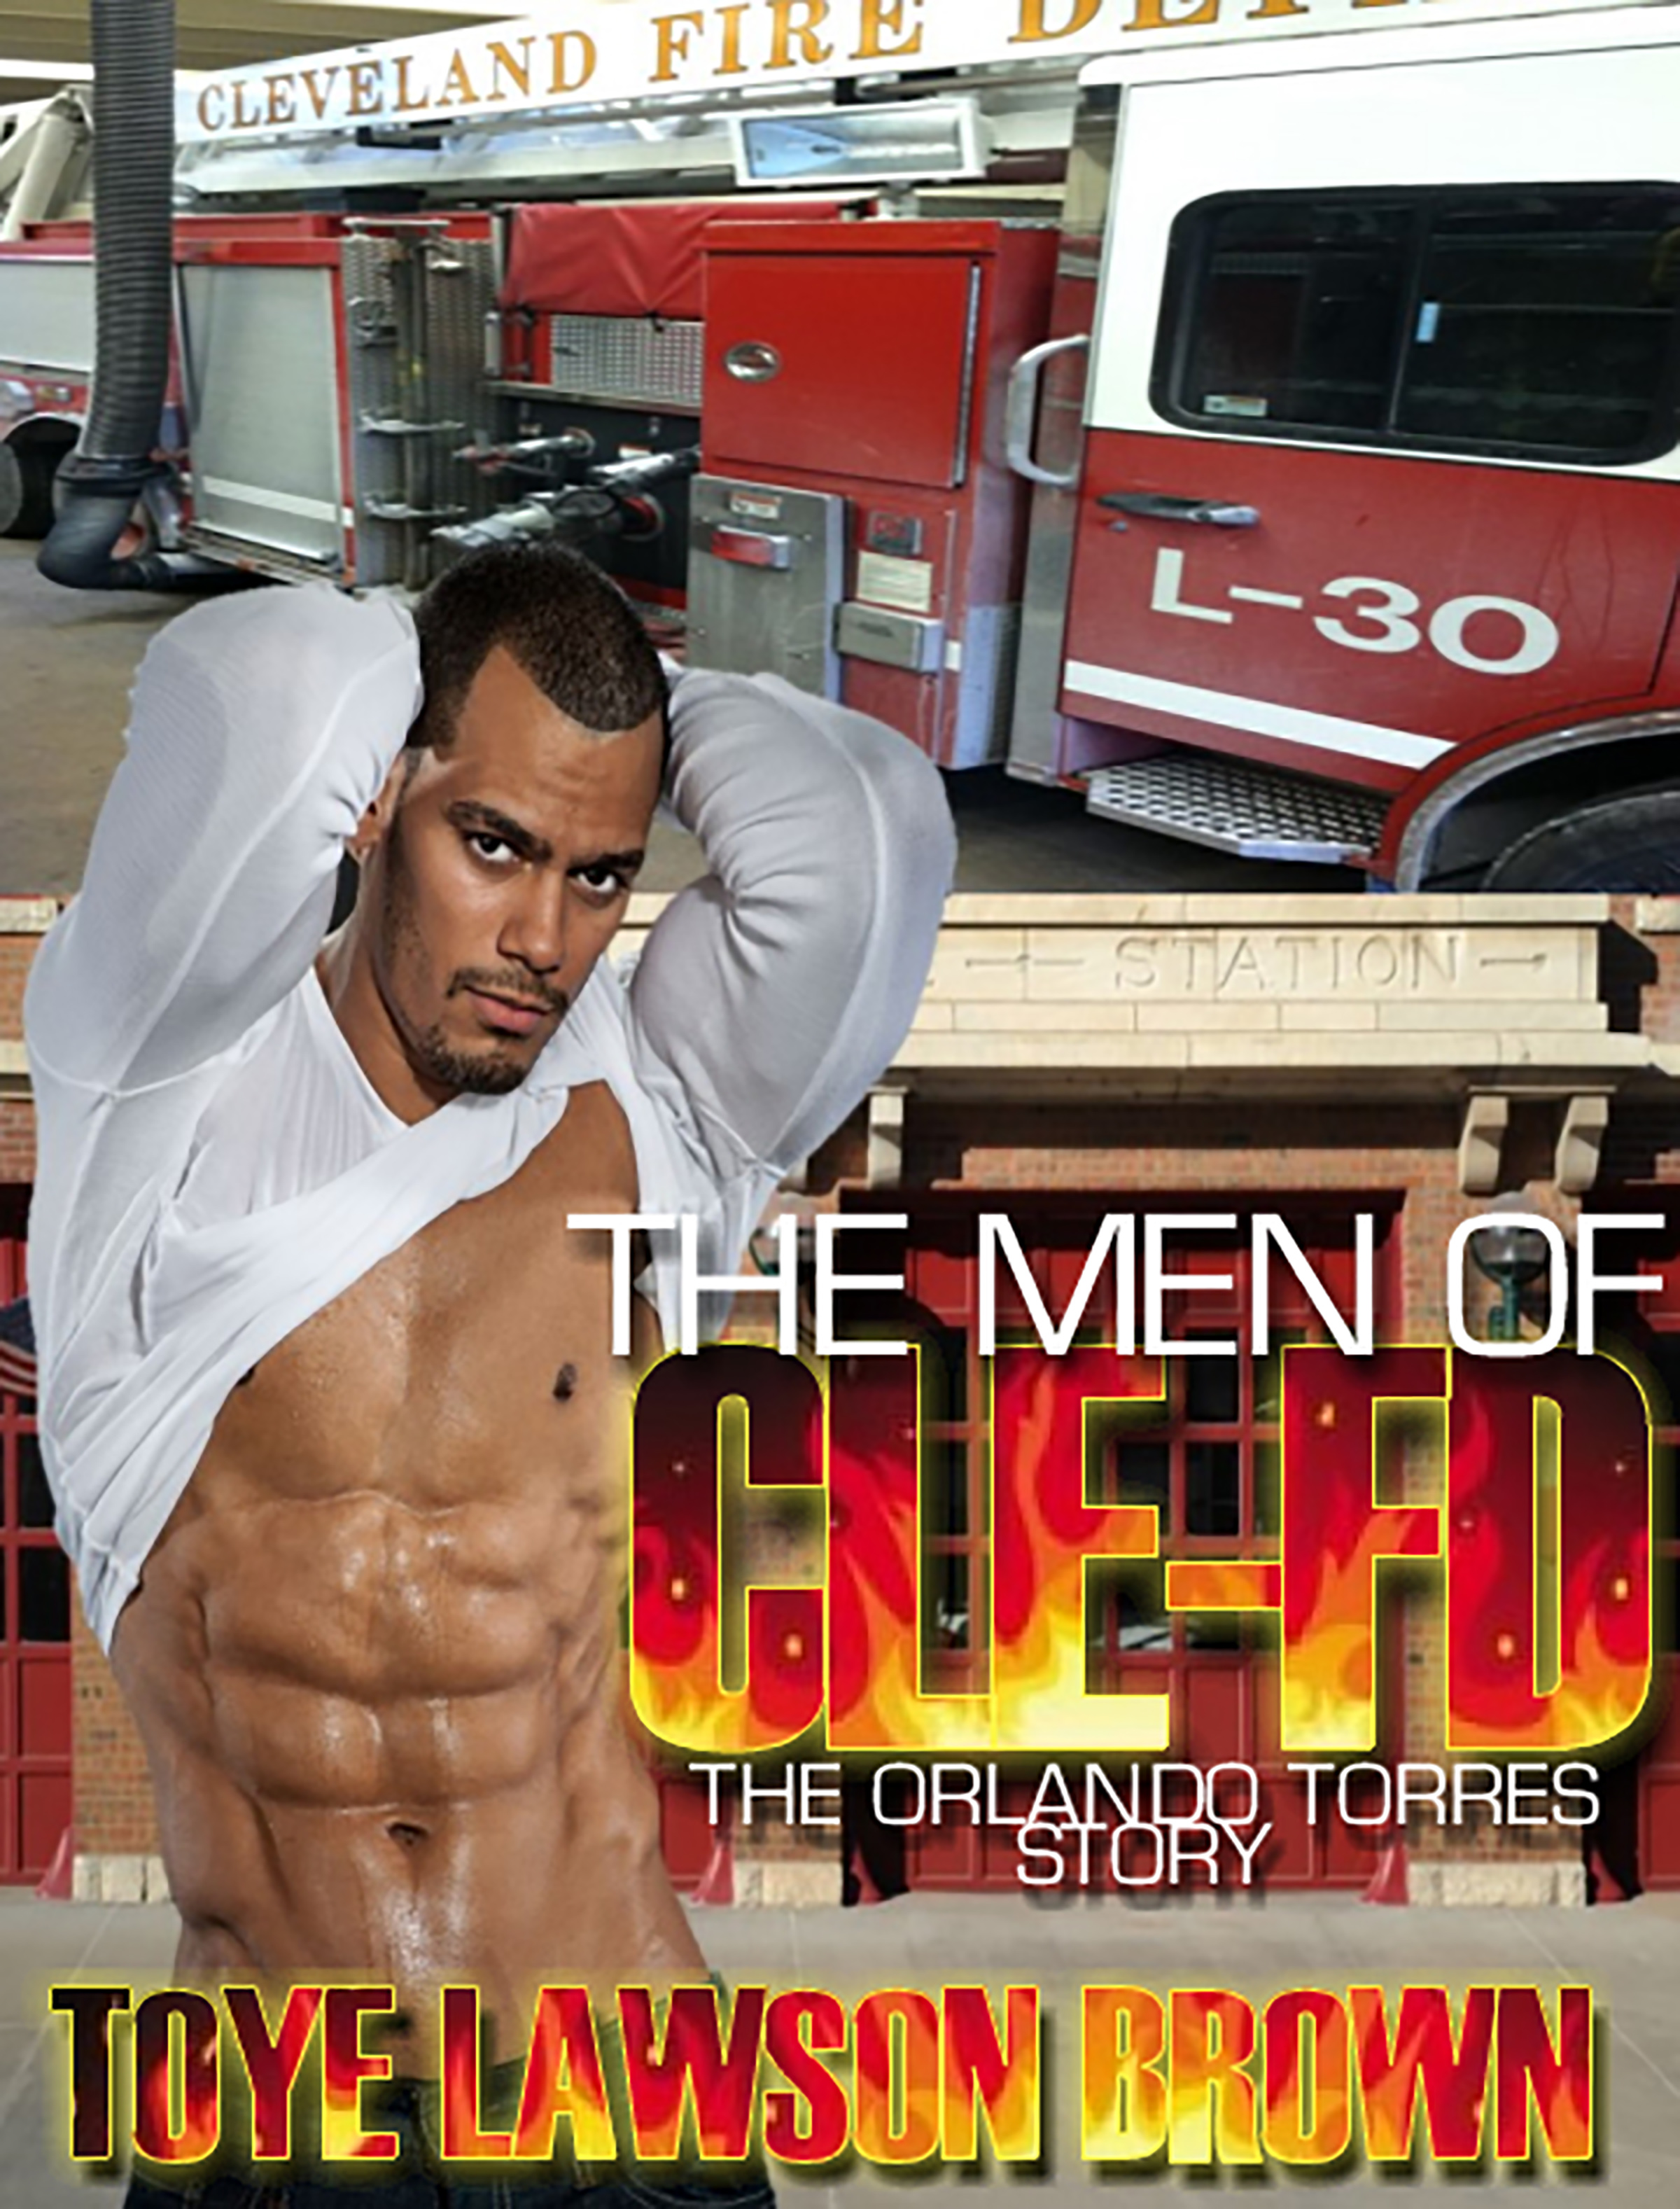 The Men Of CLE-FD The Orlando Torres Story